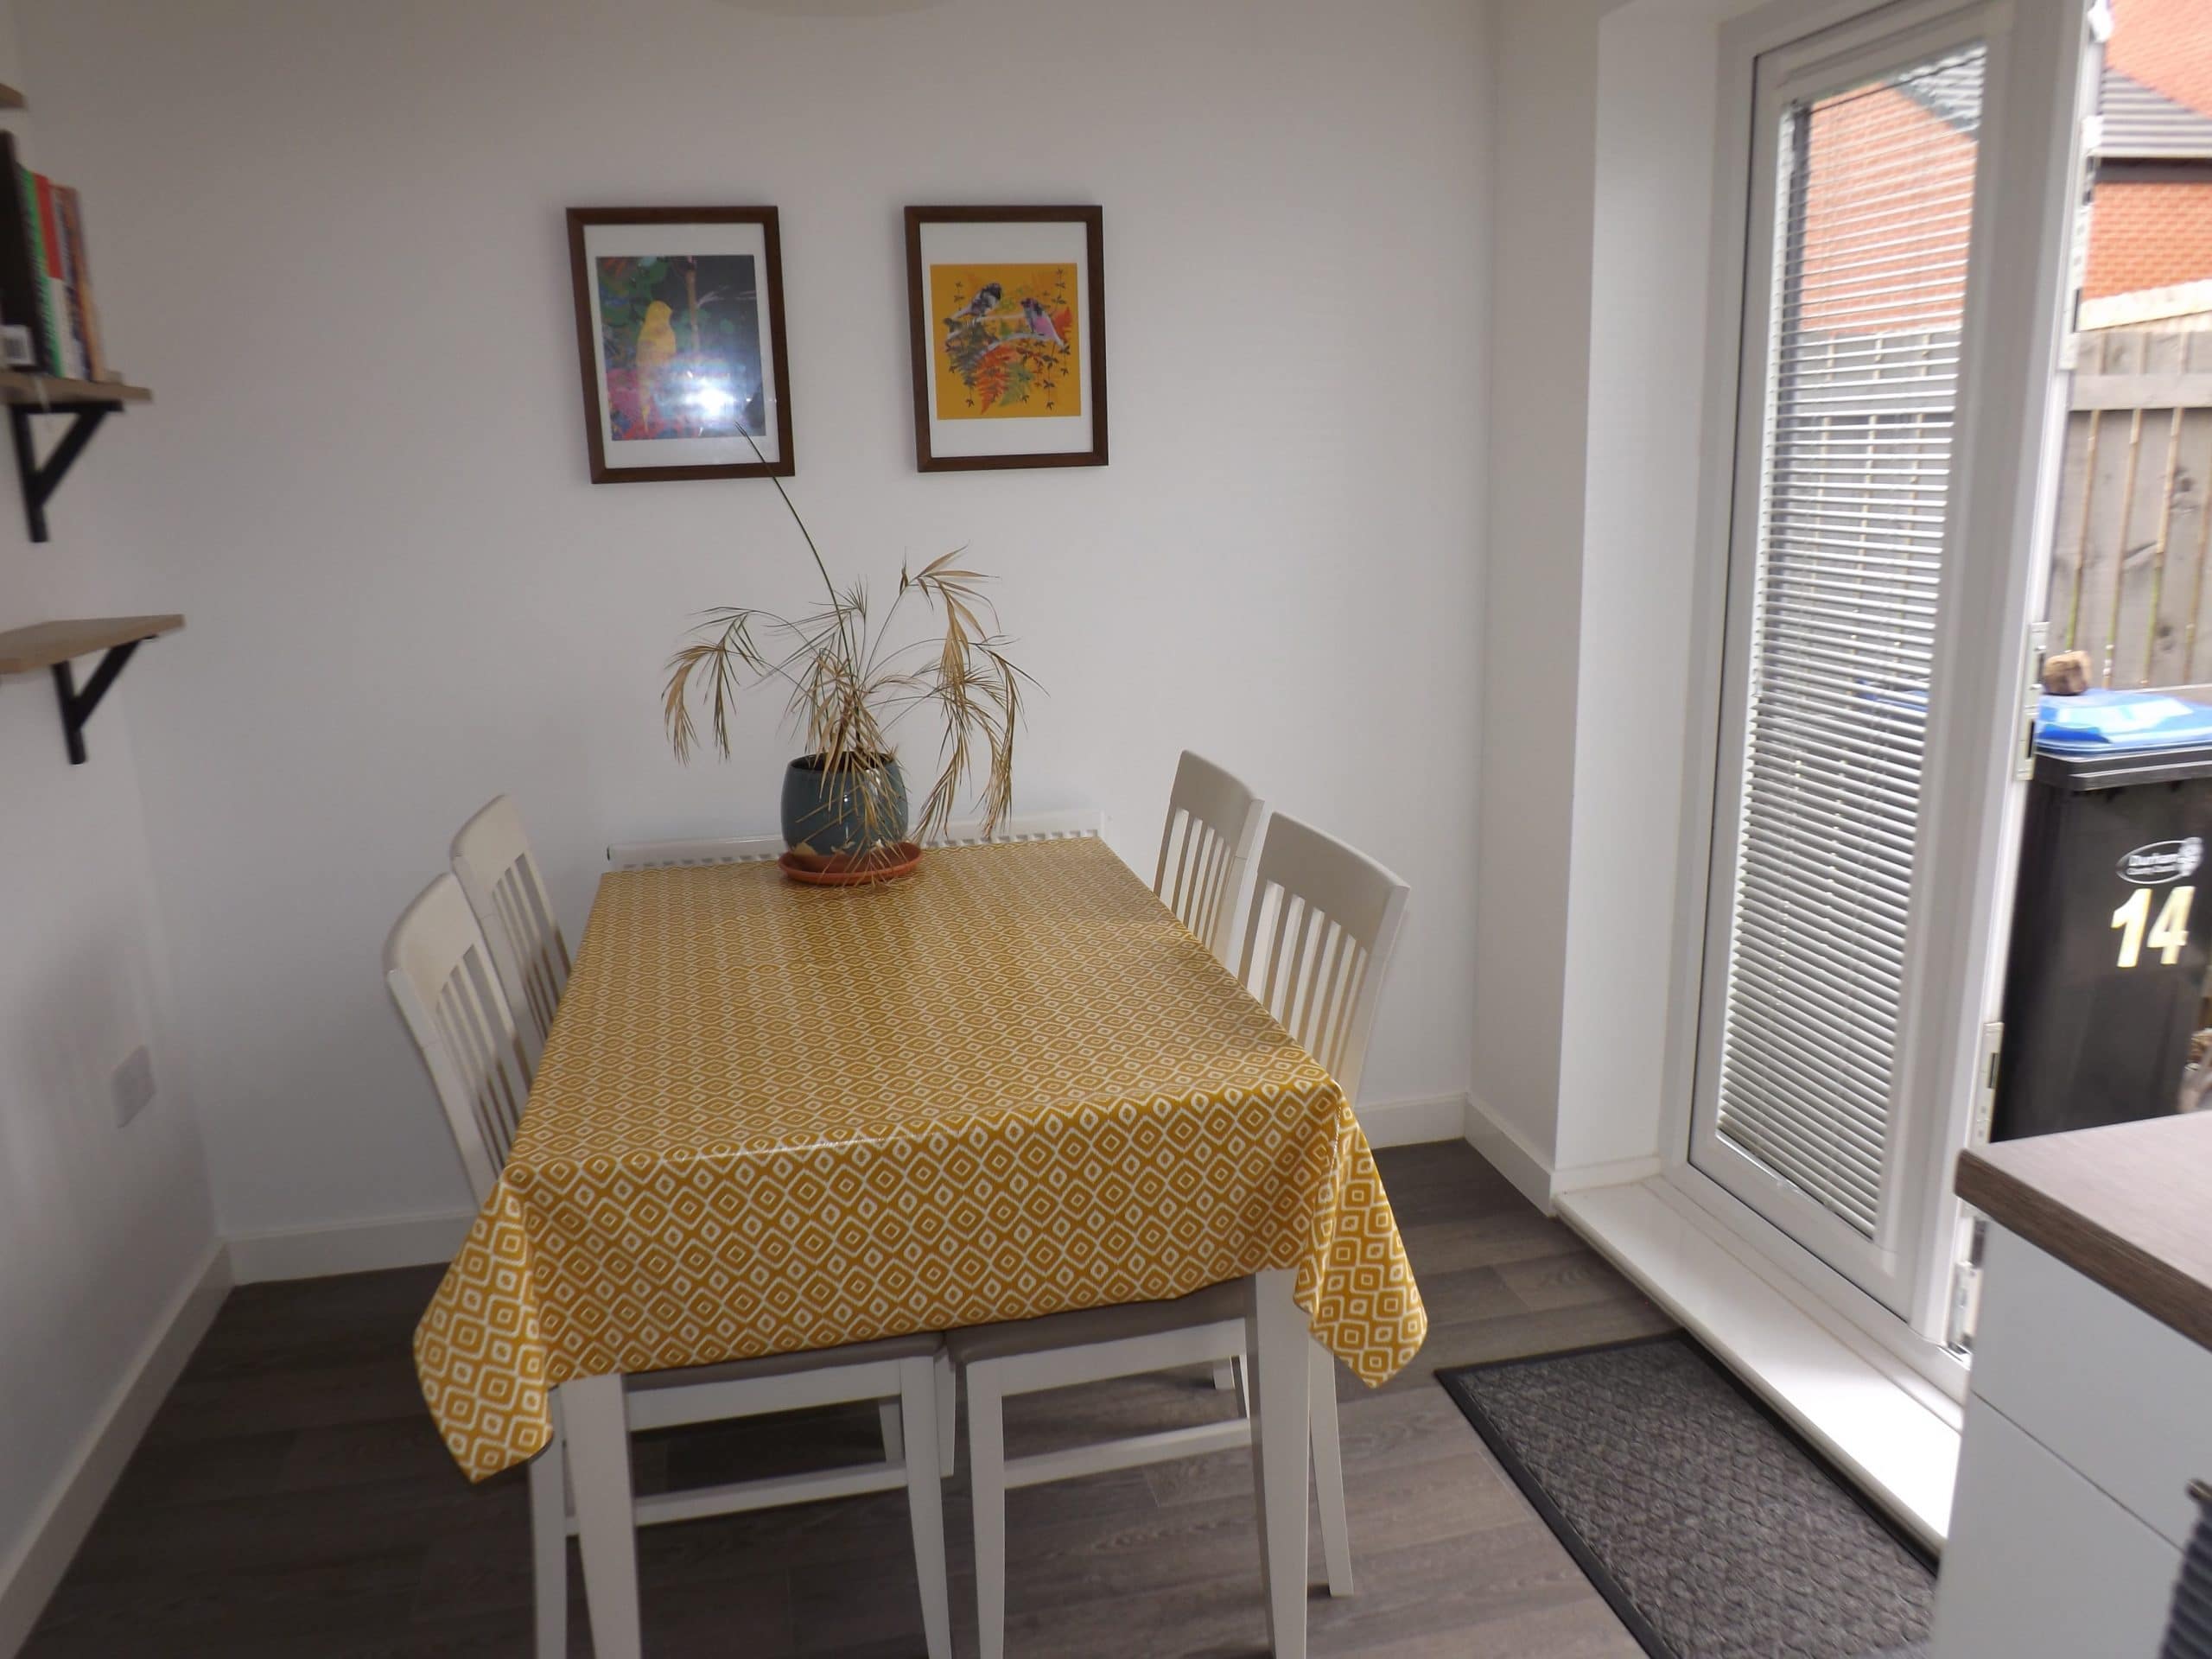 image of dining table with yellow table cover